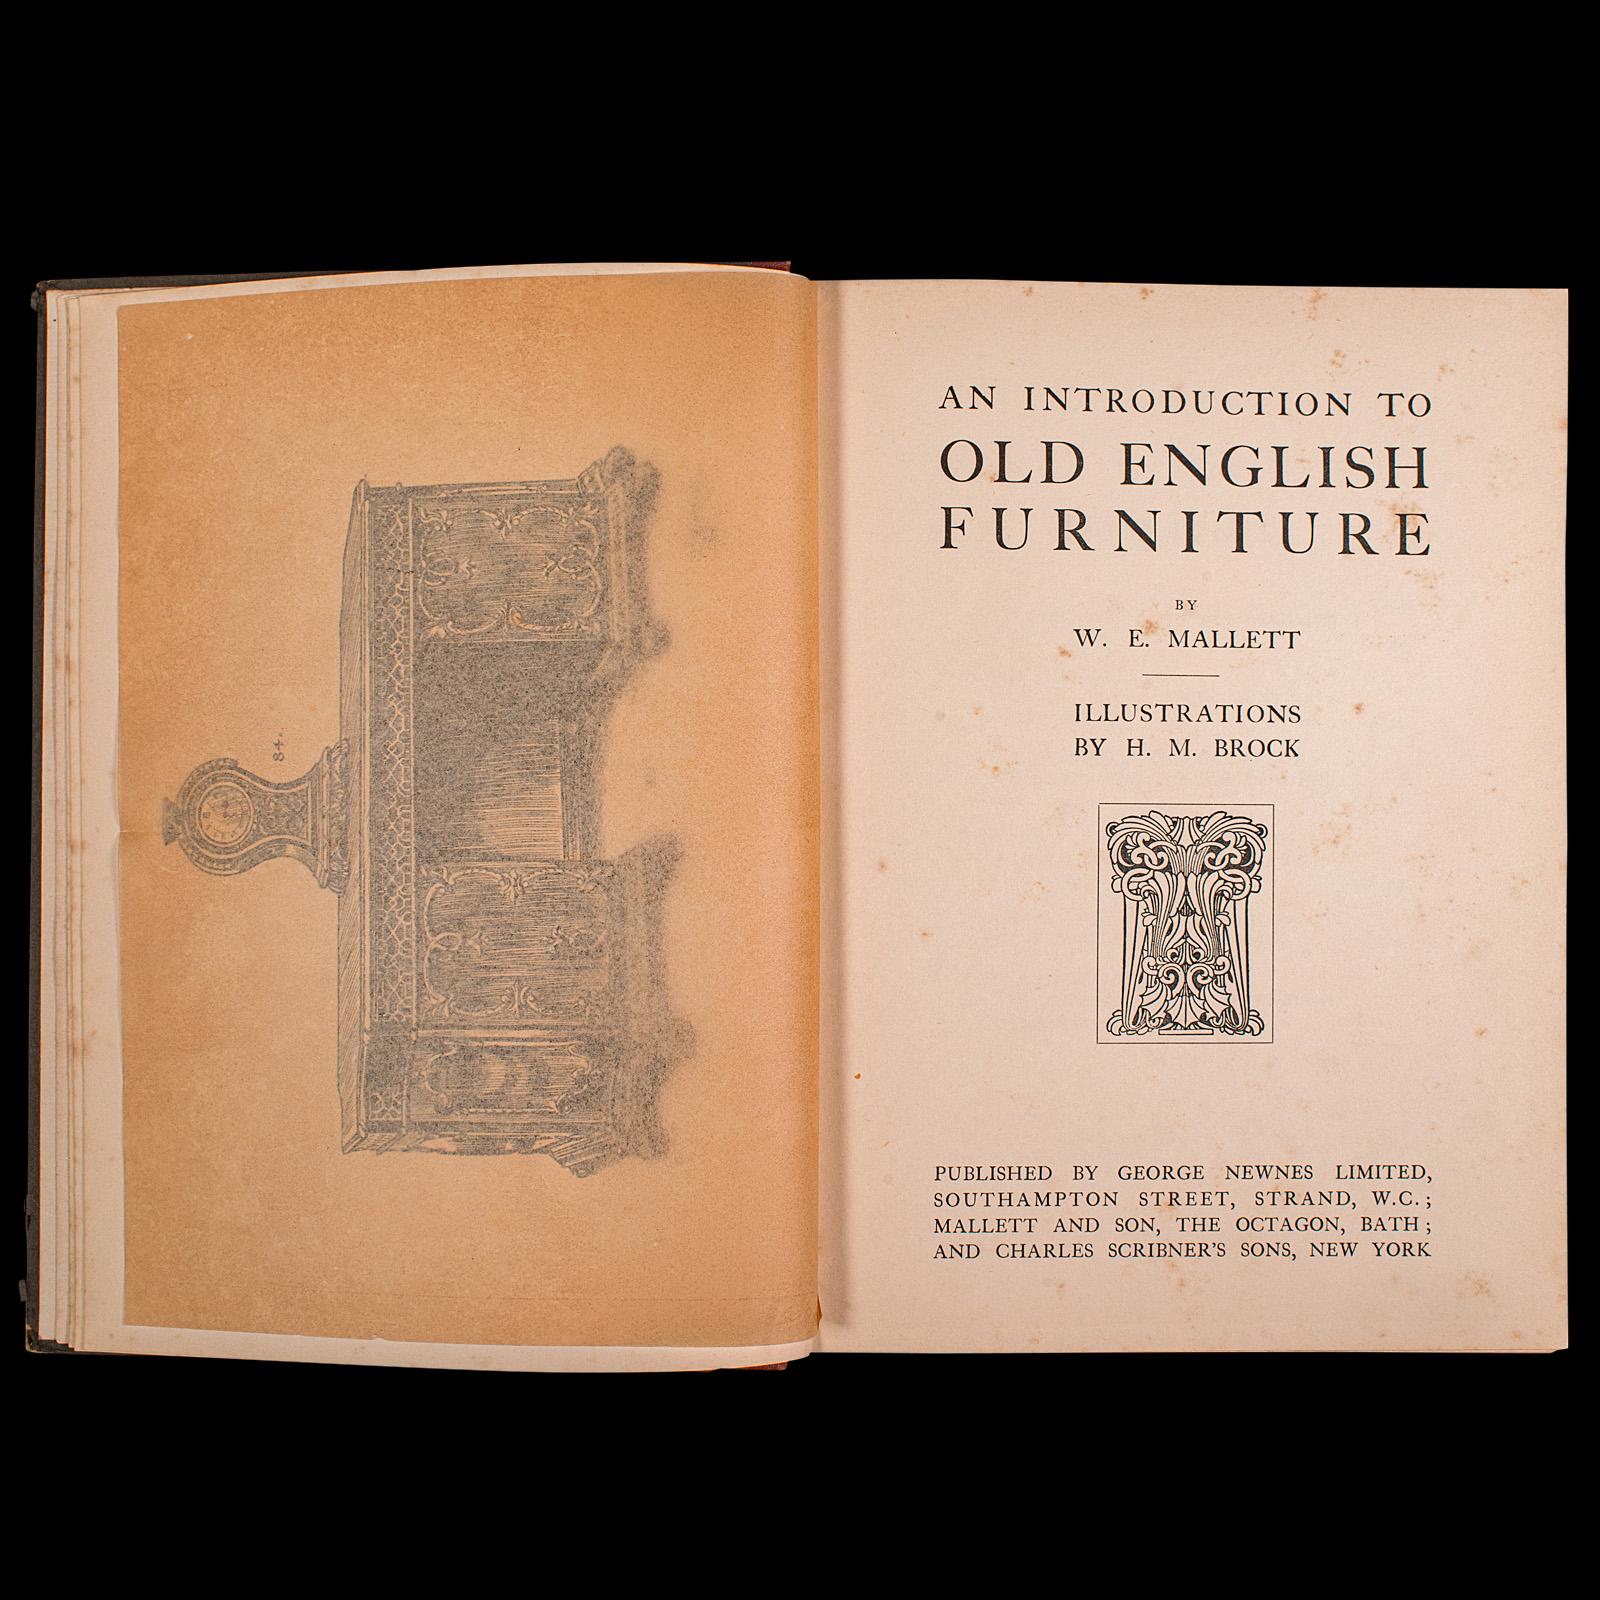 British Antique Book, Old English Furniture, Illustrated, Reference, Edwardian, C.1910 For Sale